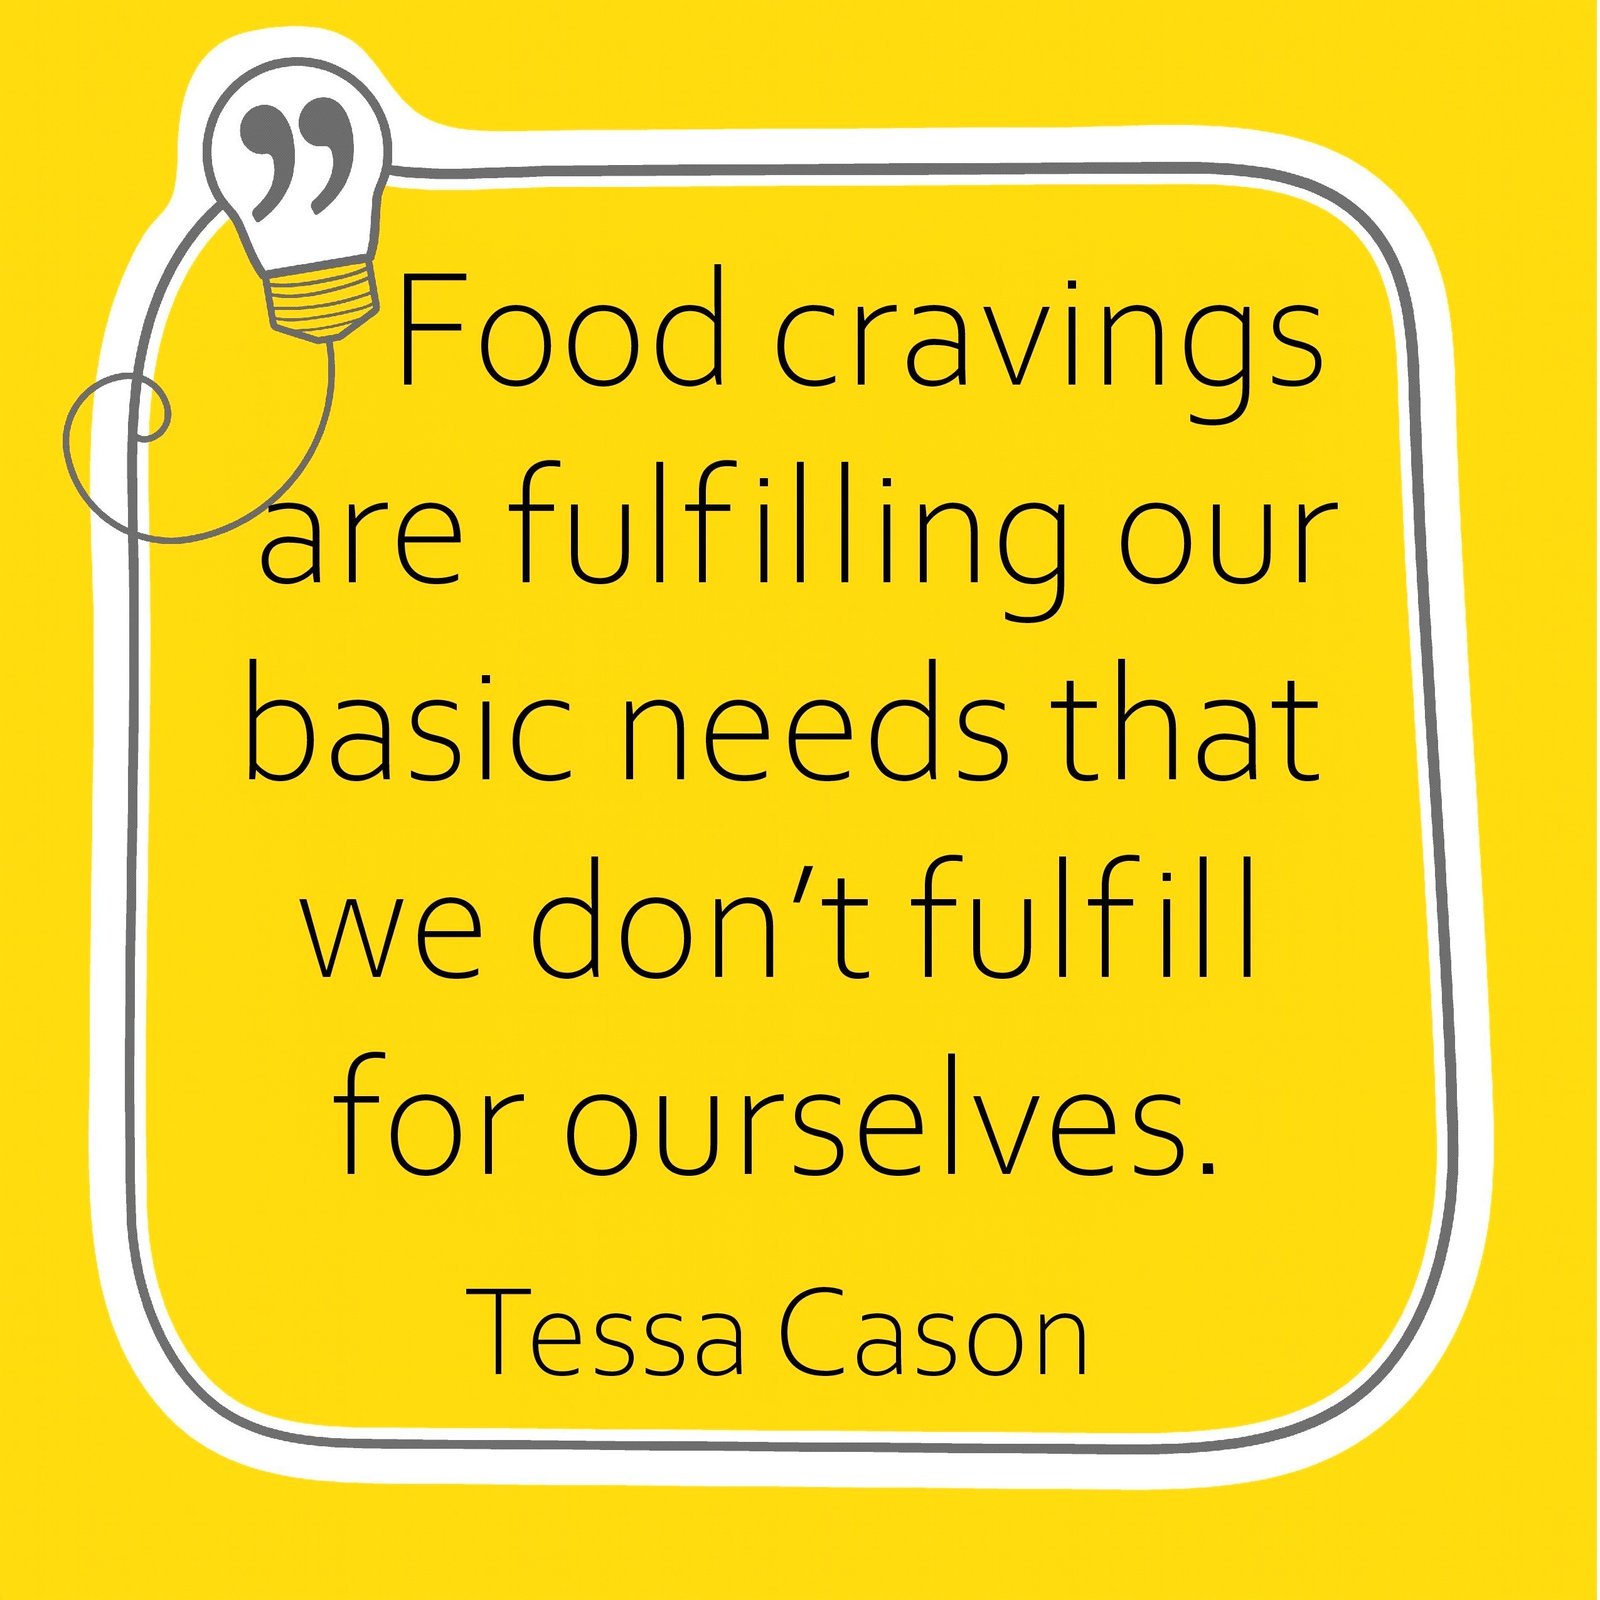 Food cravings are fulfilling our basic needs that we don't fulfill for ourselves